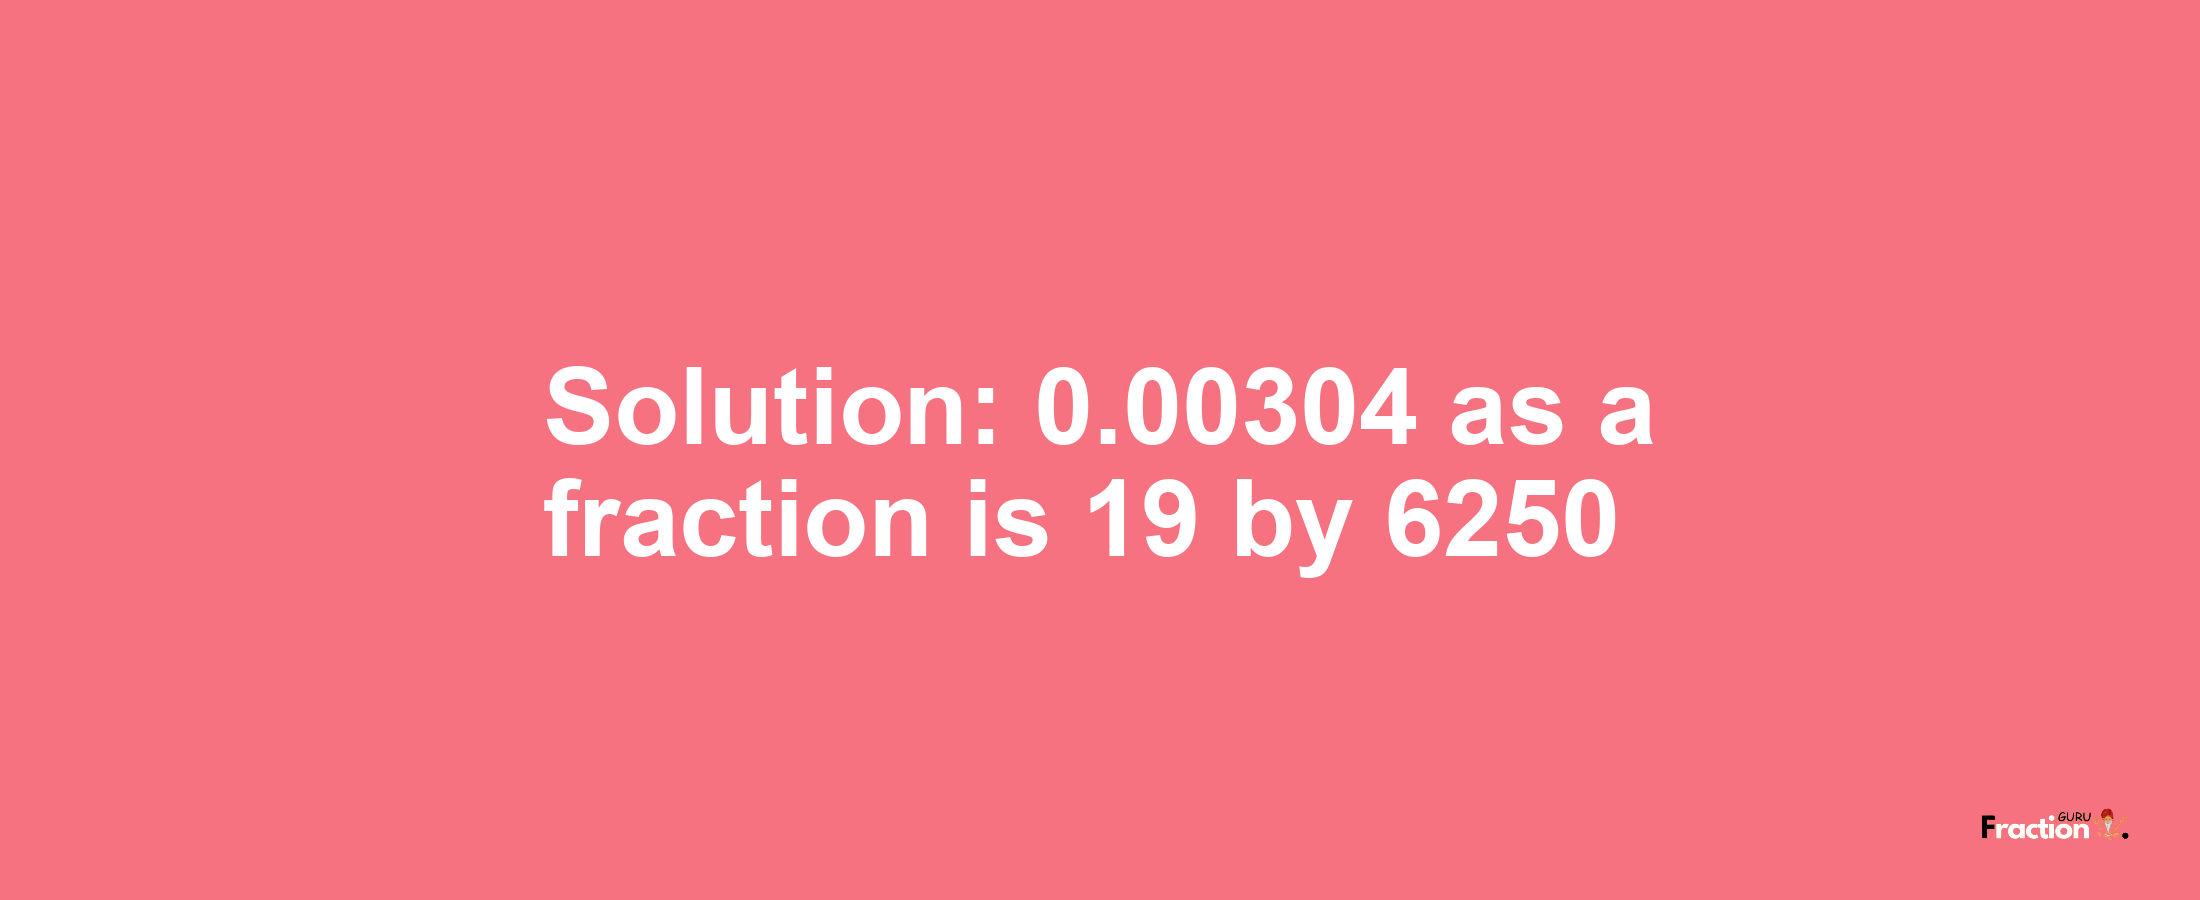 Solution:0.00304 as a fraction is 19/6250